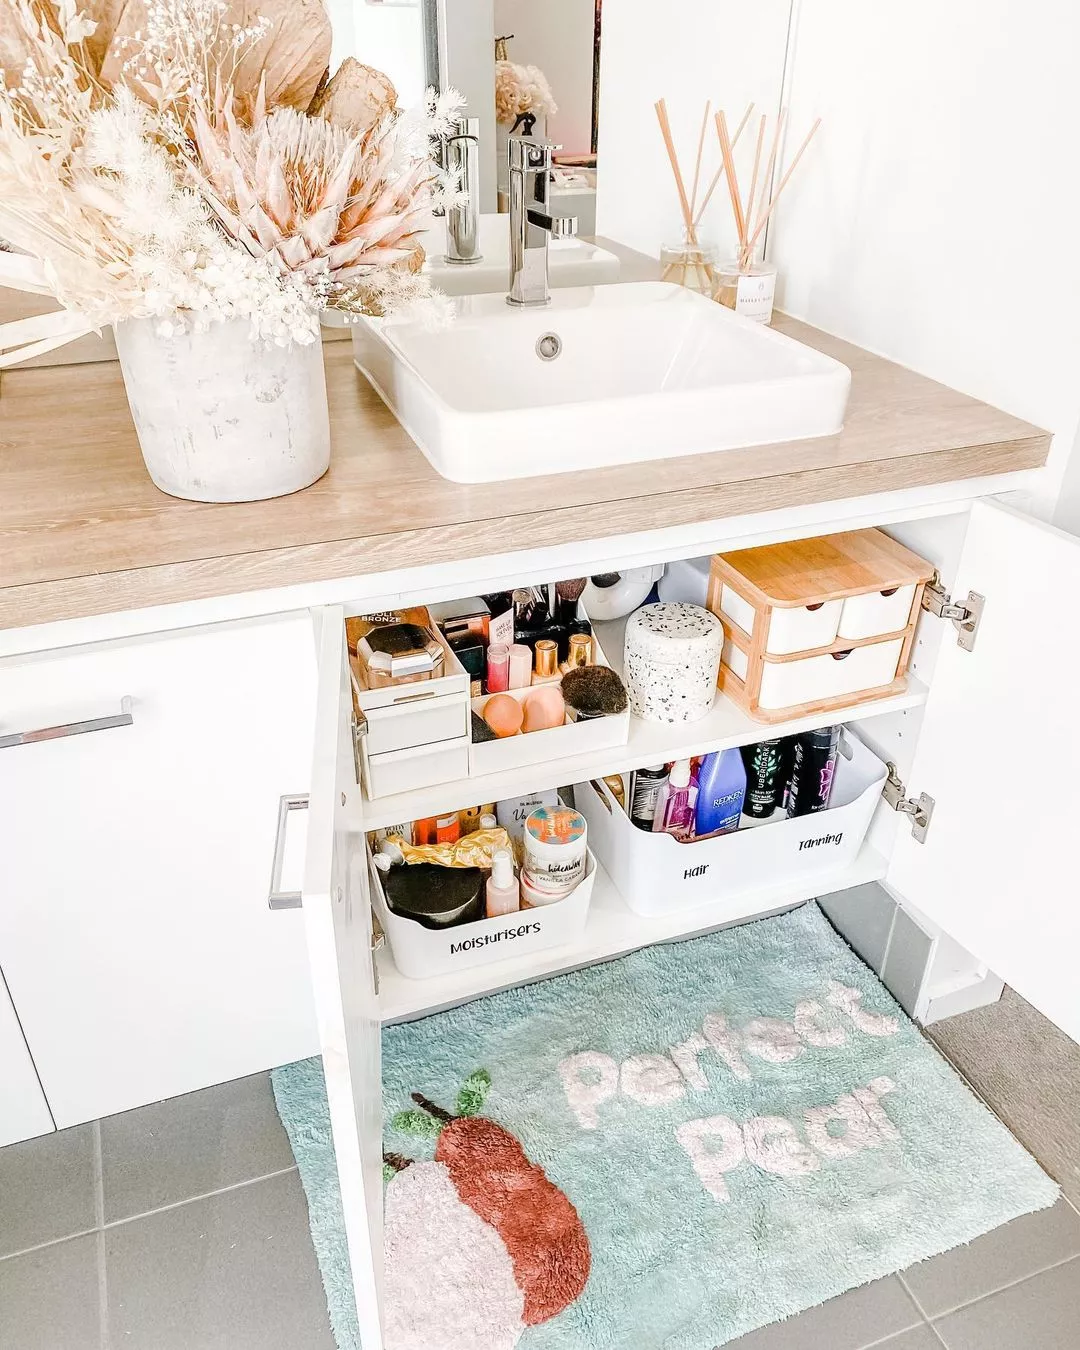 https://www.extraspace.com/blog/wp-content/uploads/2021/03/How-to-Spring-Clean-Your-Bathroom-Cabinets-Drawers.jpg.webp